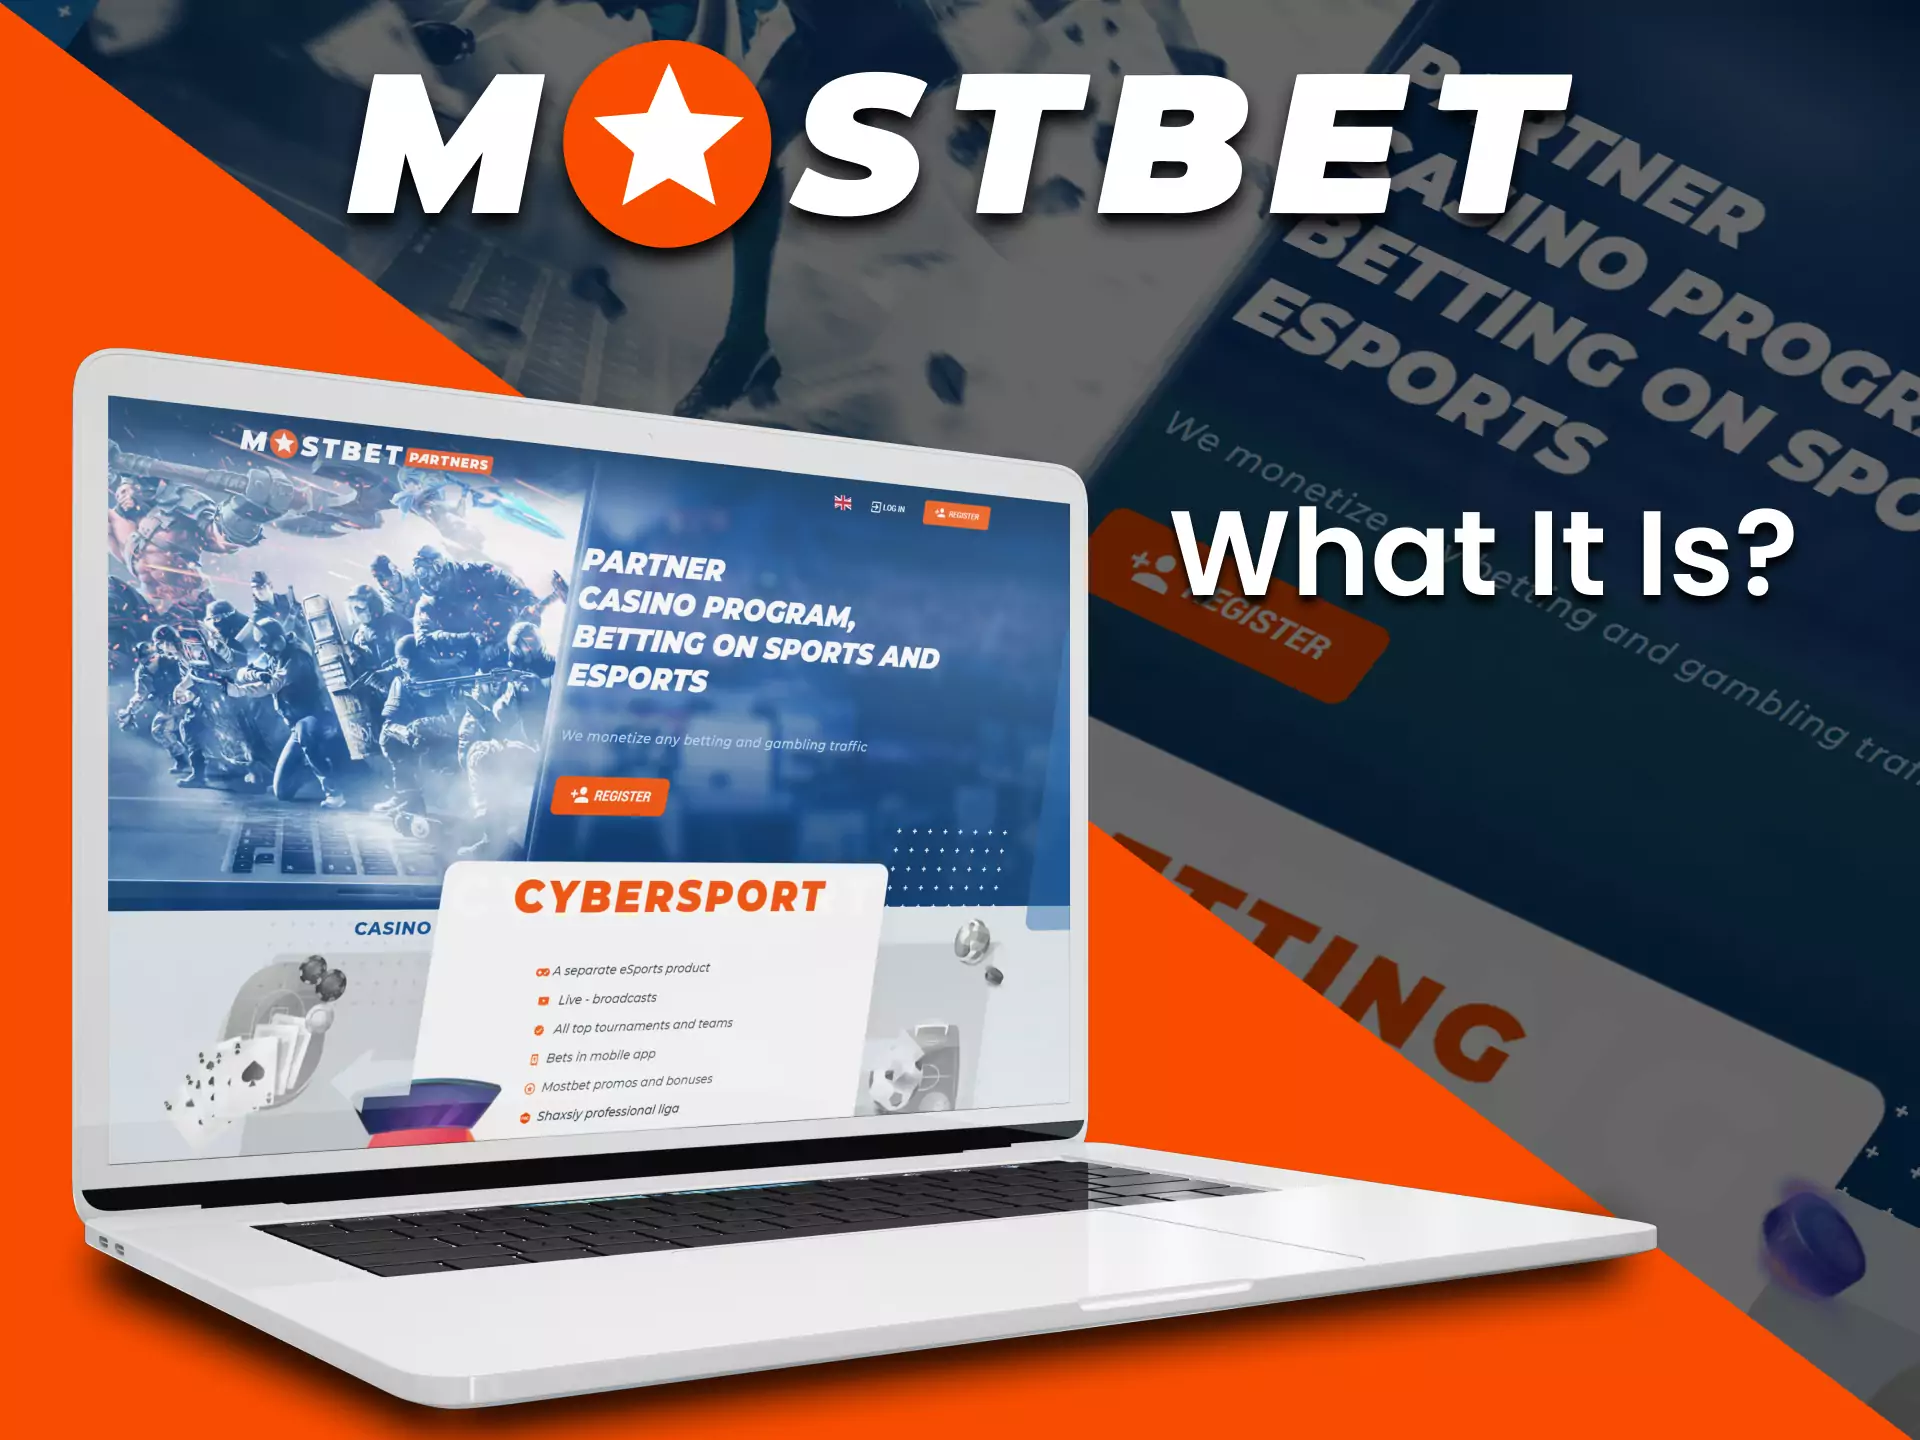 The Mostbet affiliate program helps its users to earn more money.